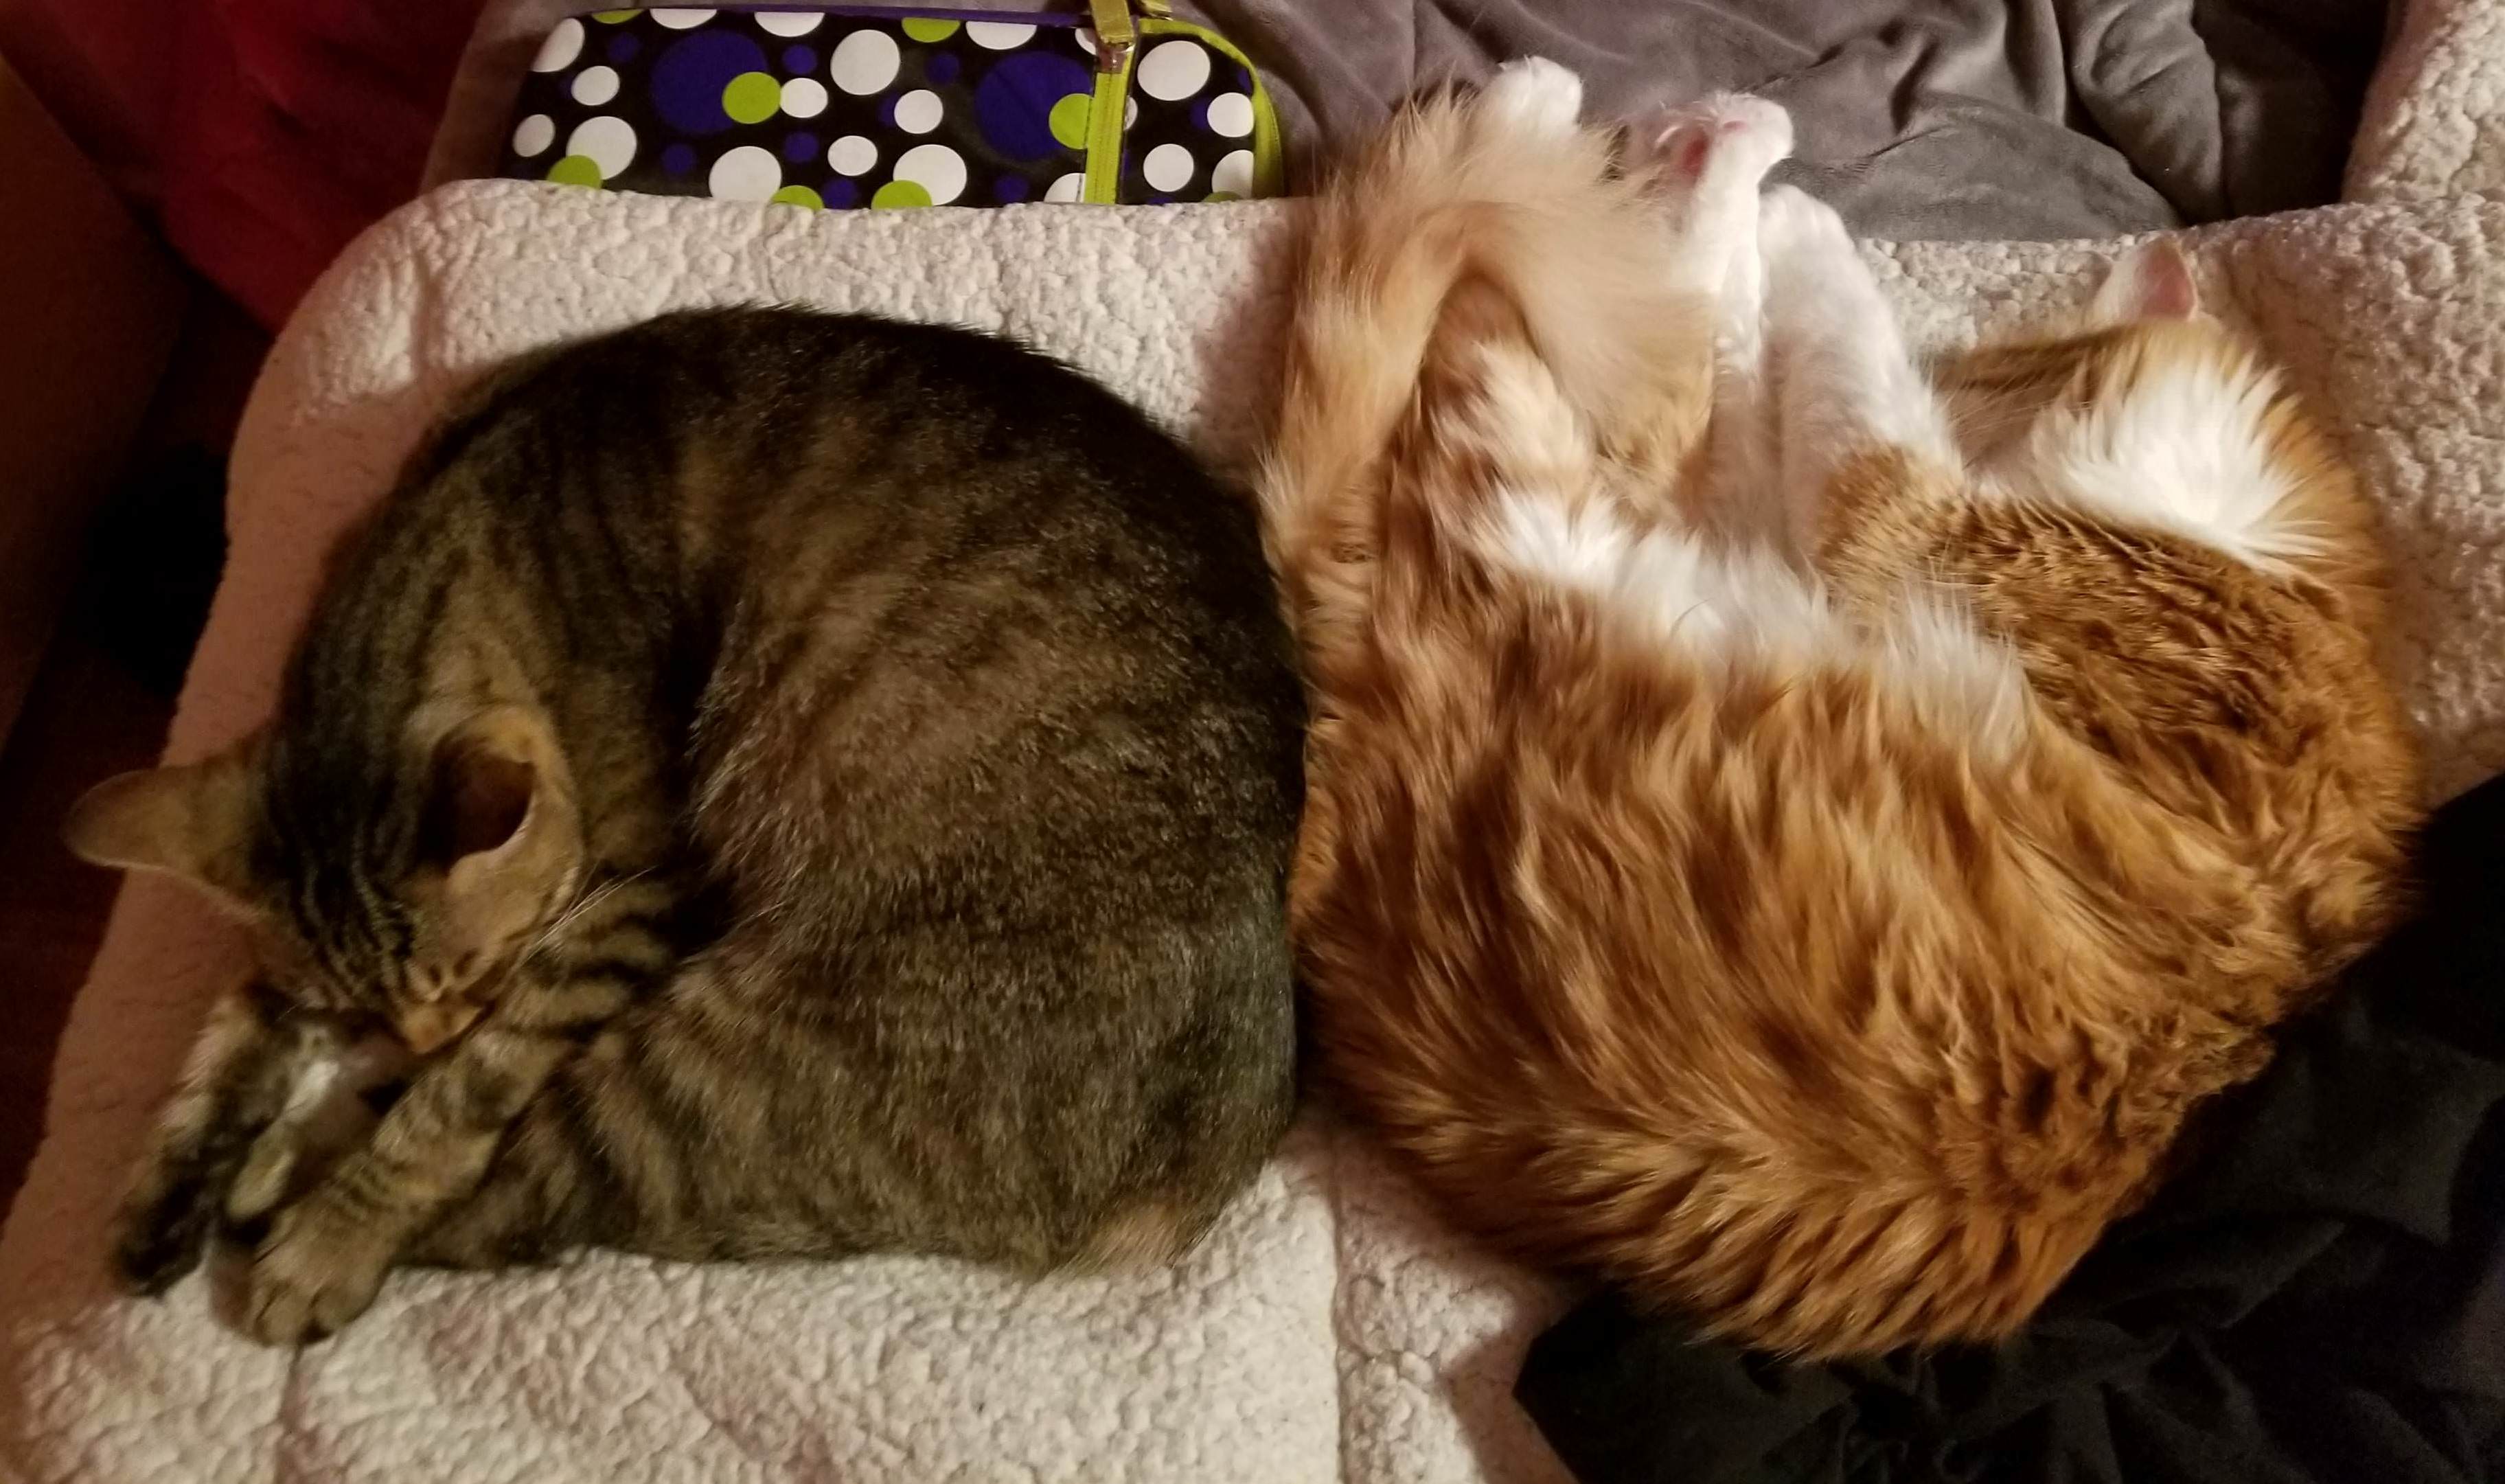 Stanley and rusty are inseparable